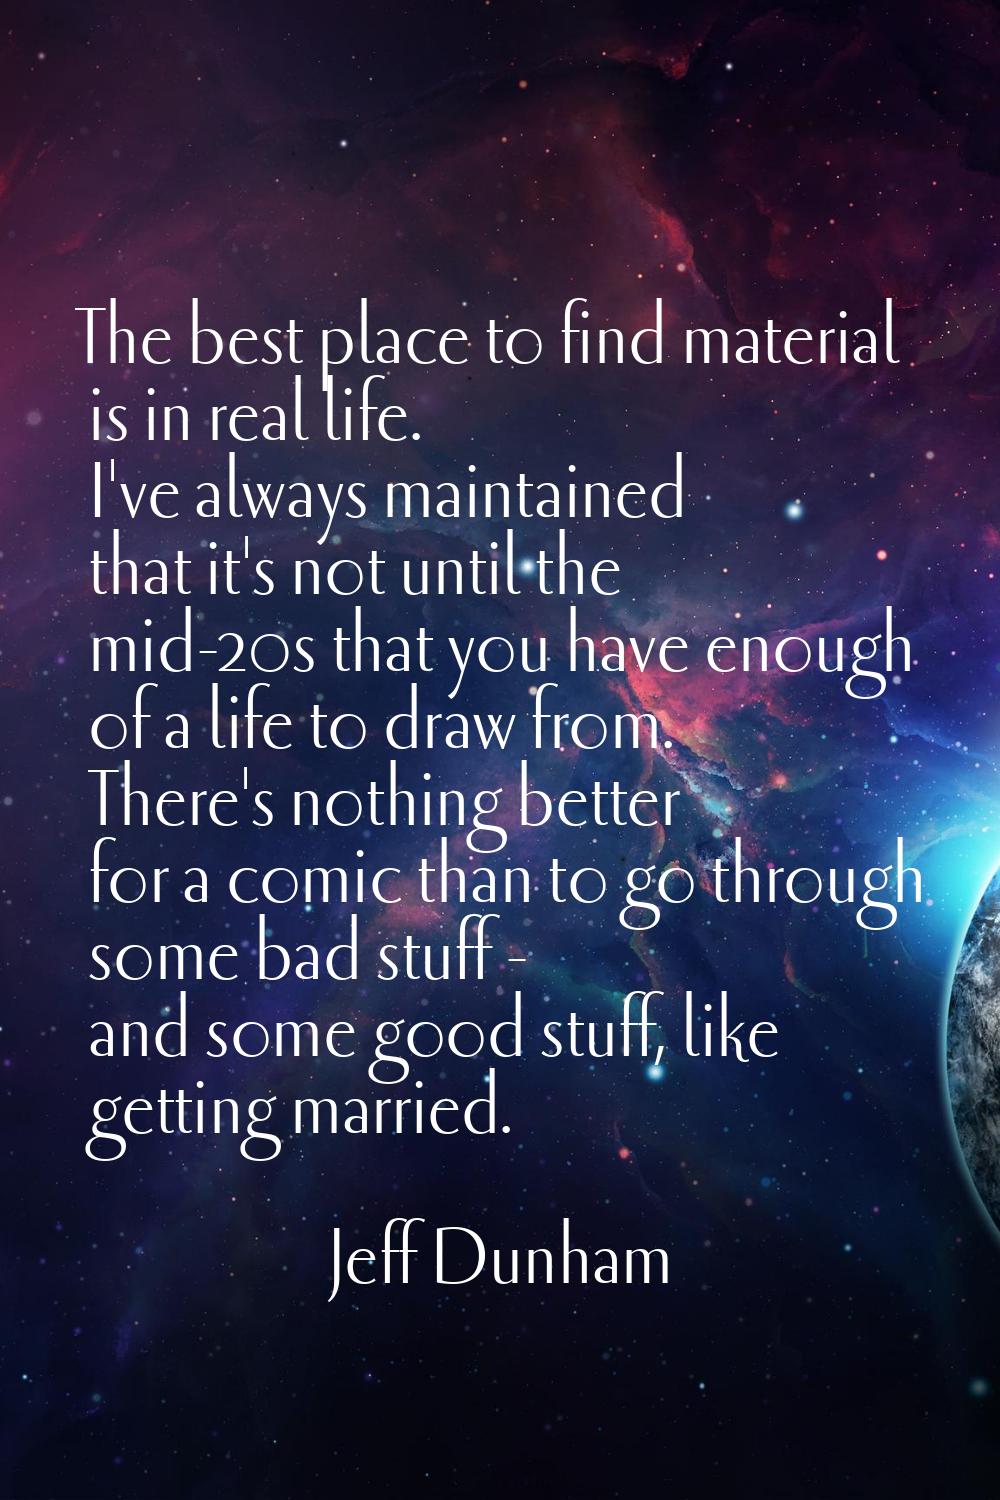 The best place to find material is in real life. I've always maintained that it's not until the mid